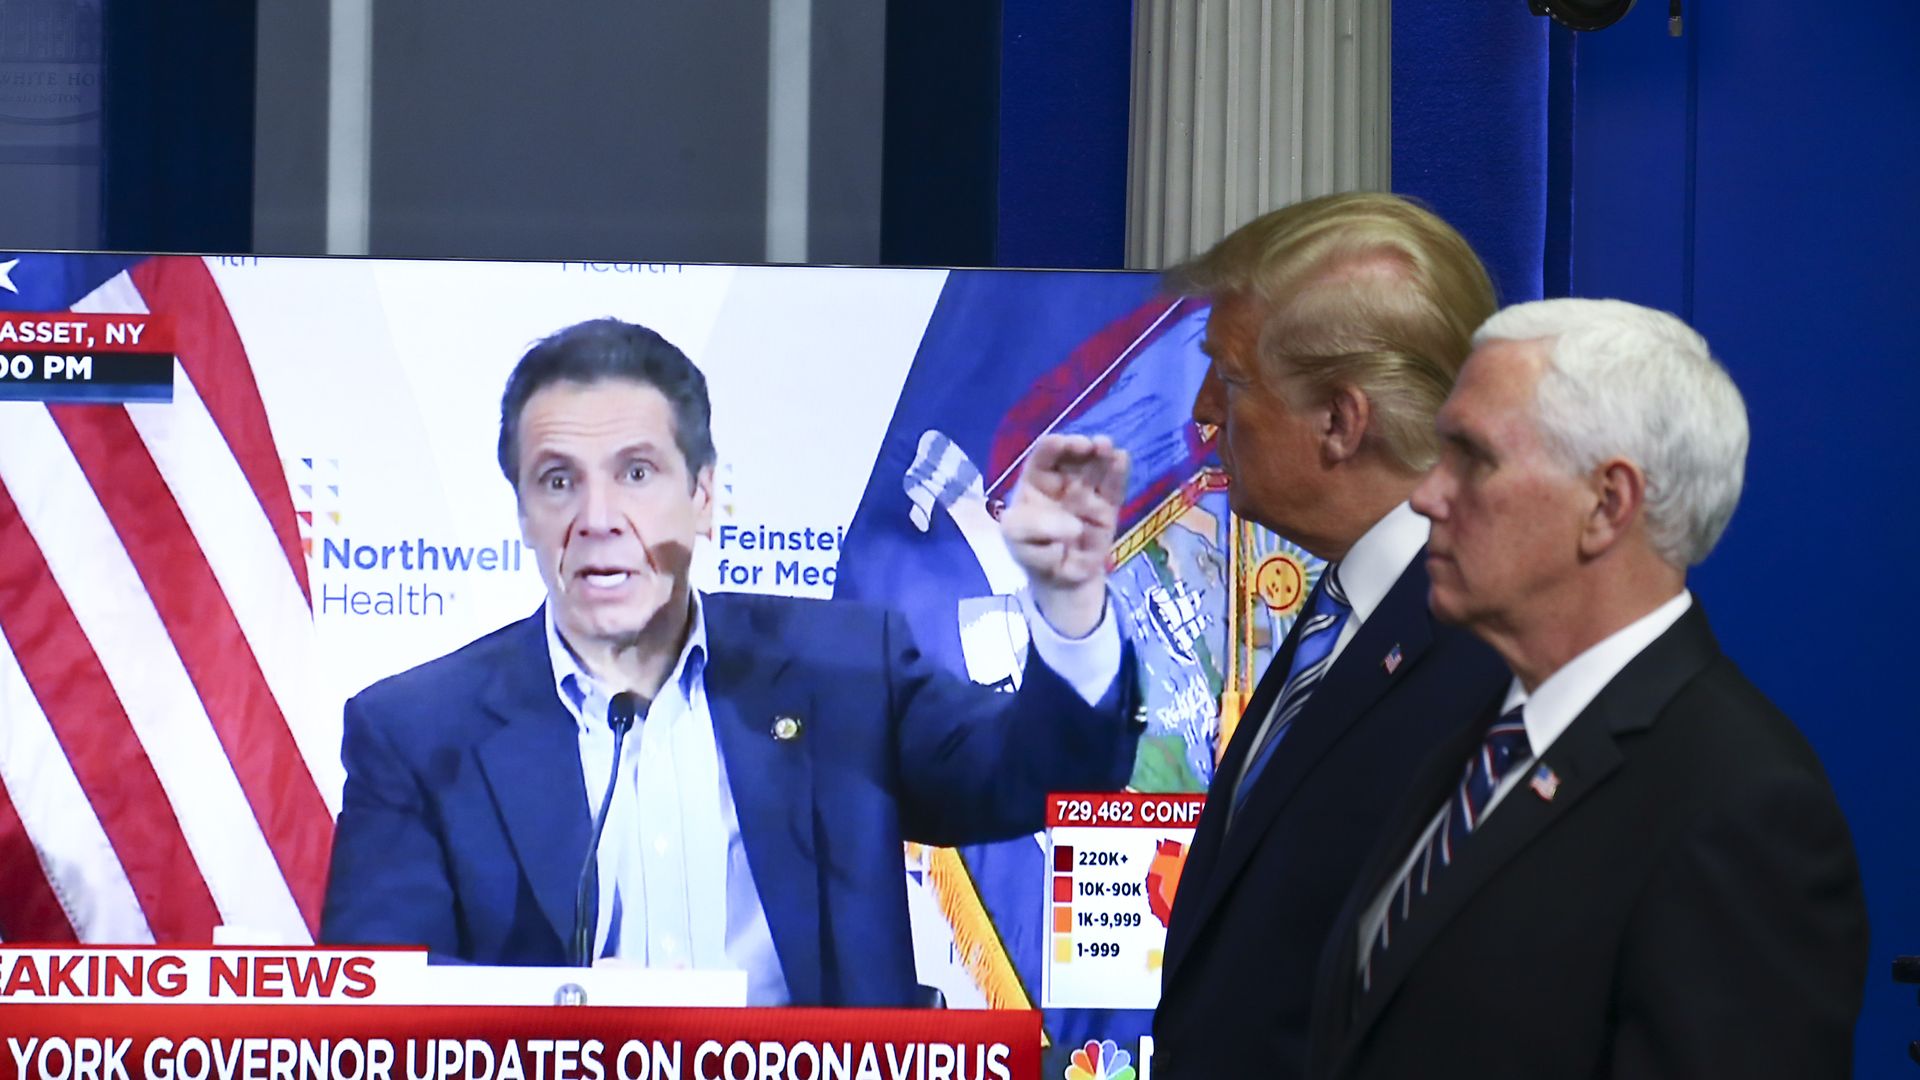 President Trump and Vice President Mike Pence walk by a TV showing a COVID-19 press briefing held by New York Gov. Andrew Cuomo in April 2020.